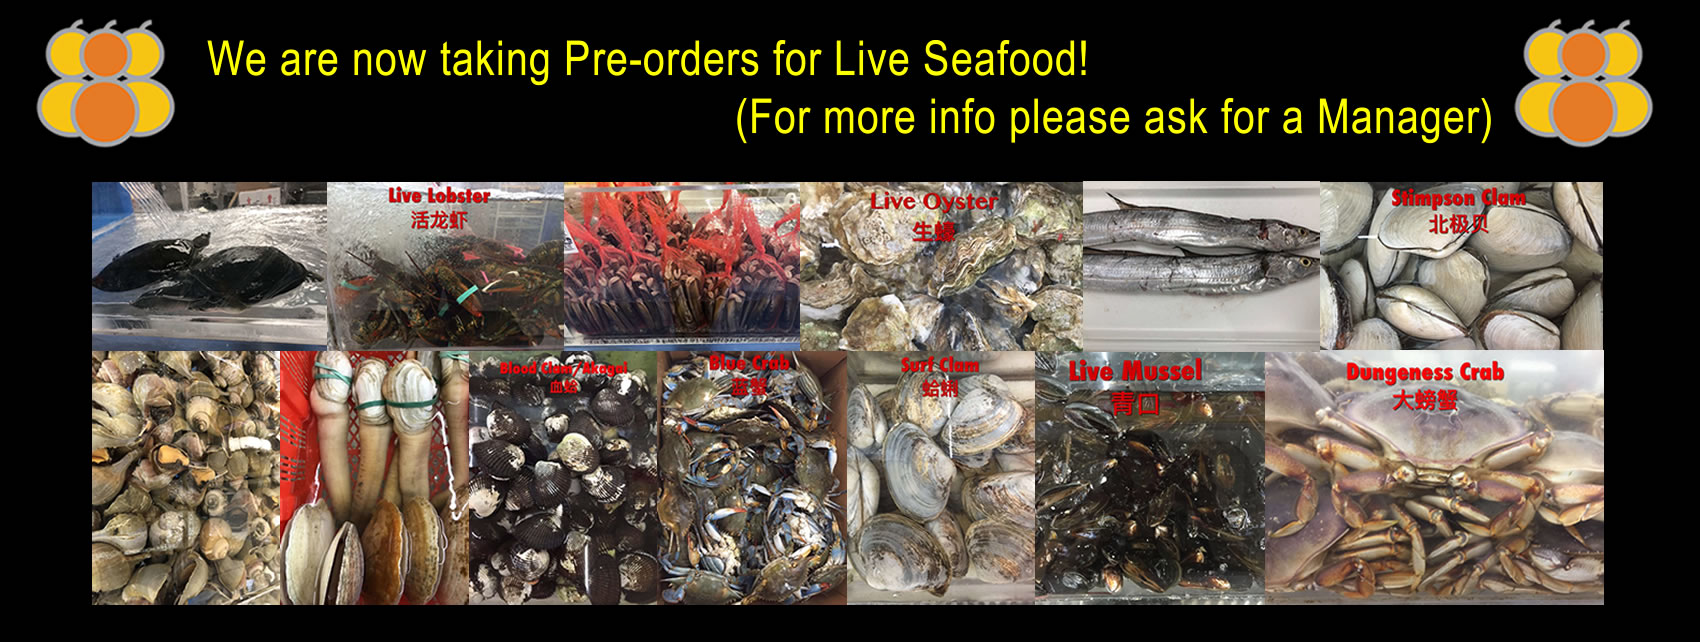 Taking Pre-orders for Live Seafood!